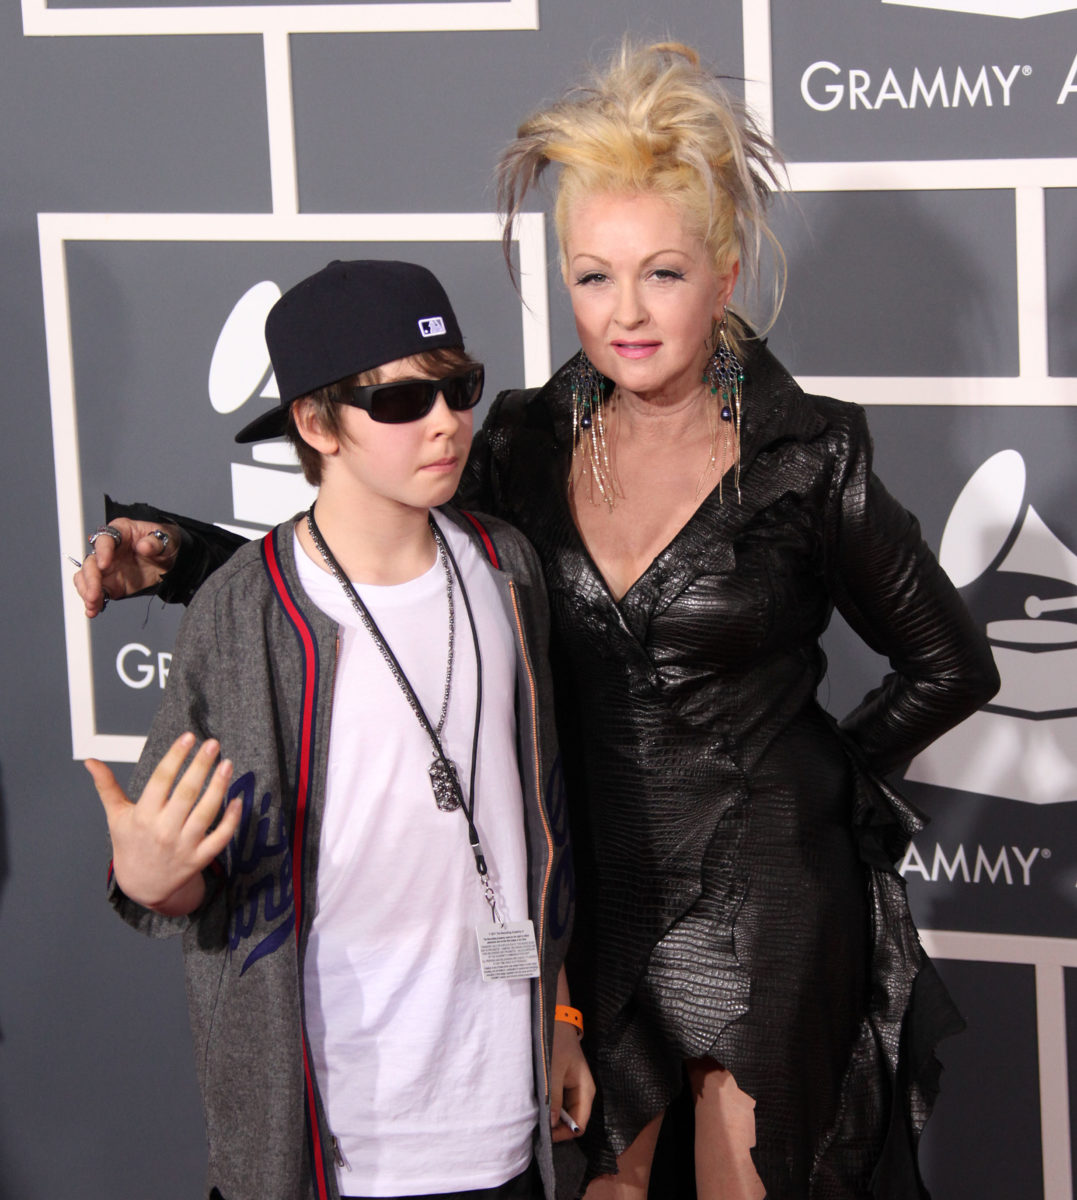 son of 80s icon cyndi lauper has found himself in some real legal trouble | new reports have surfaced that revealed cyndi lauper’s son has been arrested. according to people, declyn lauper was detained on july 14 in new york city.